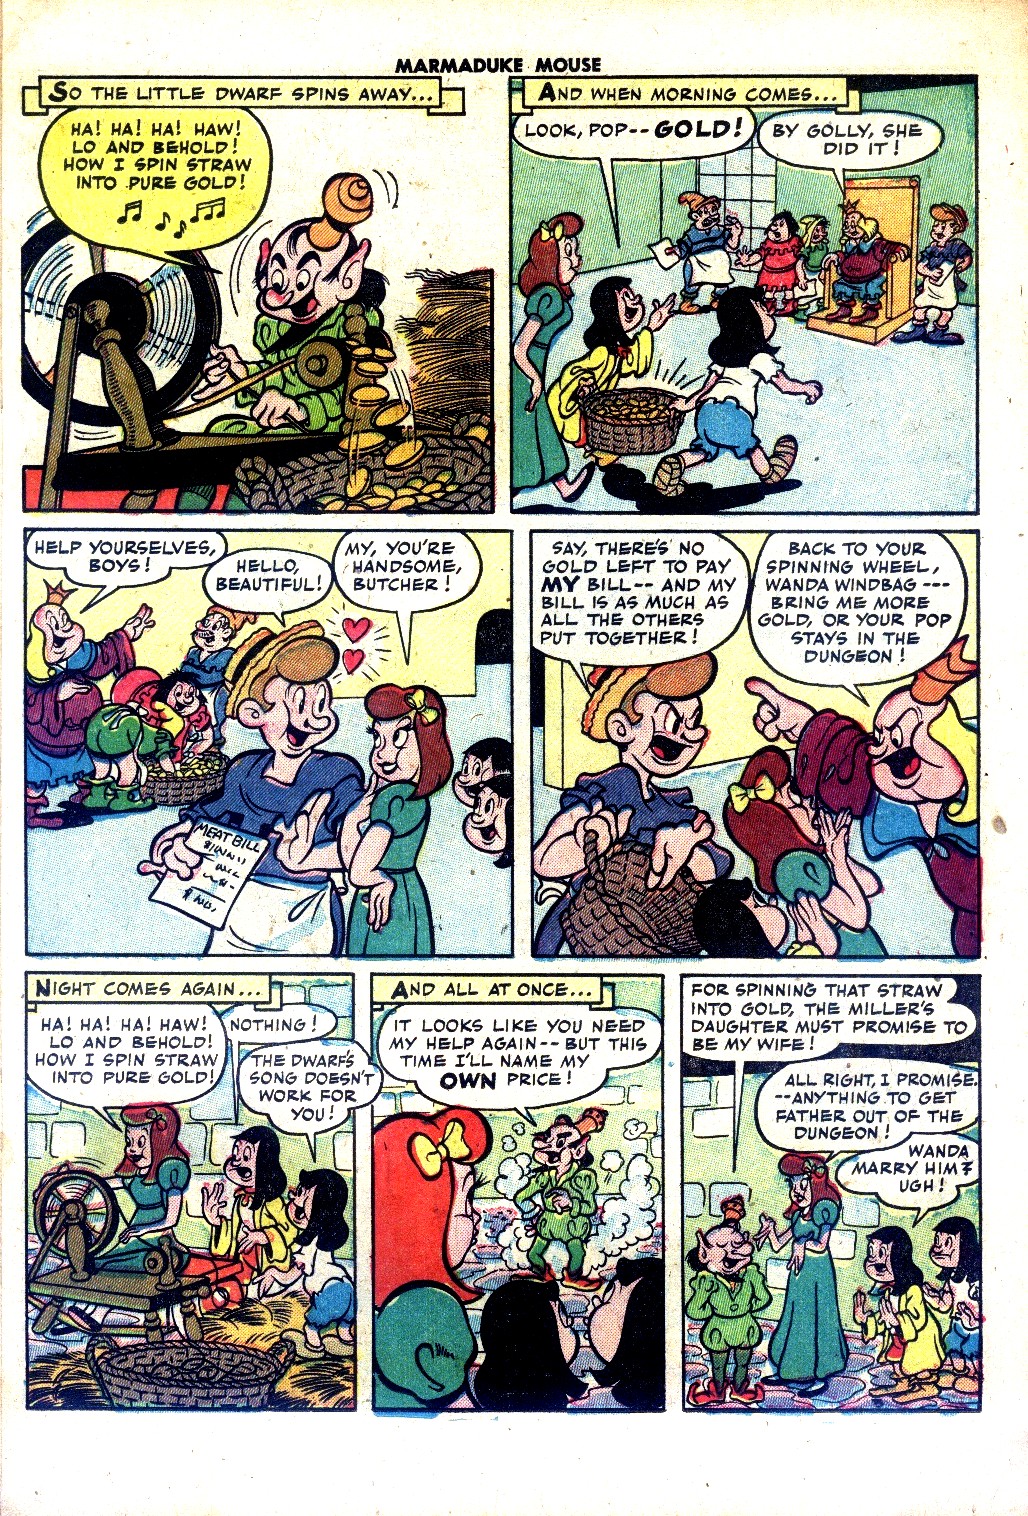 Read online Marmaduke Mouse comic -  Issue #40 - 11